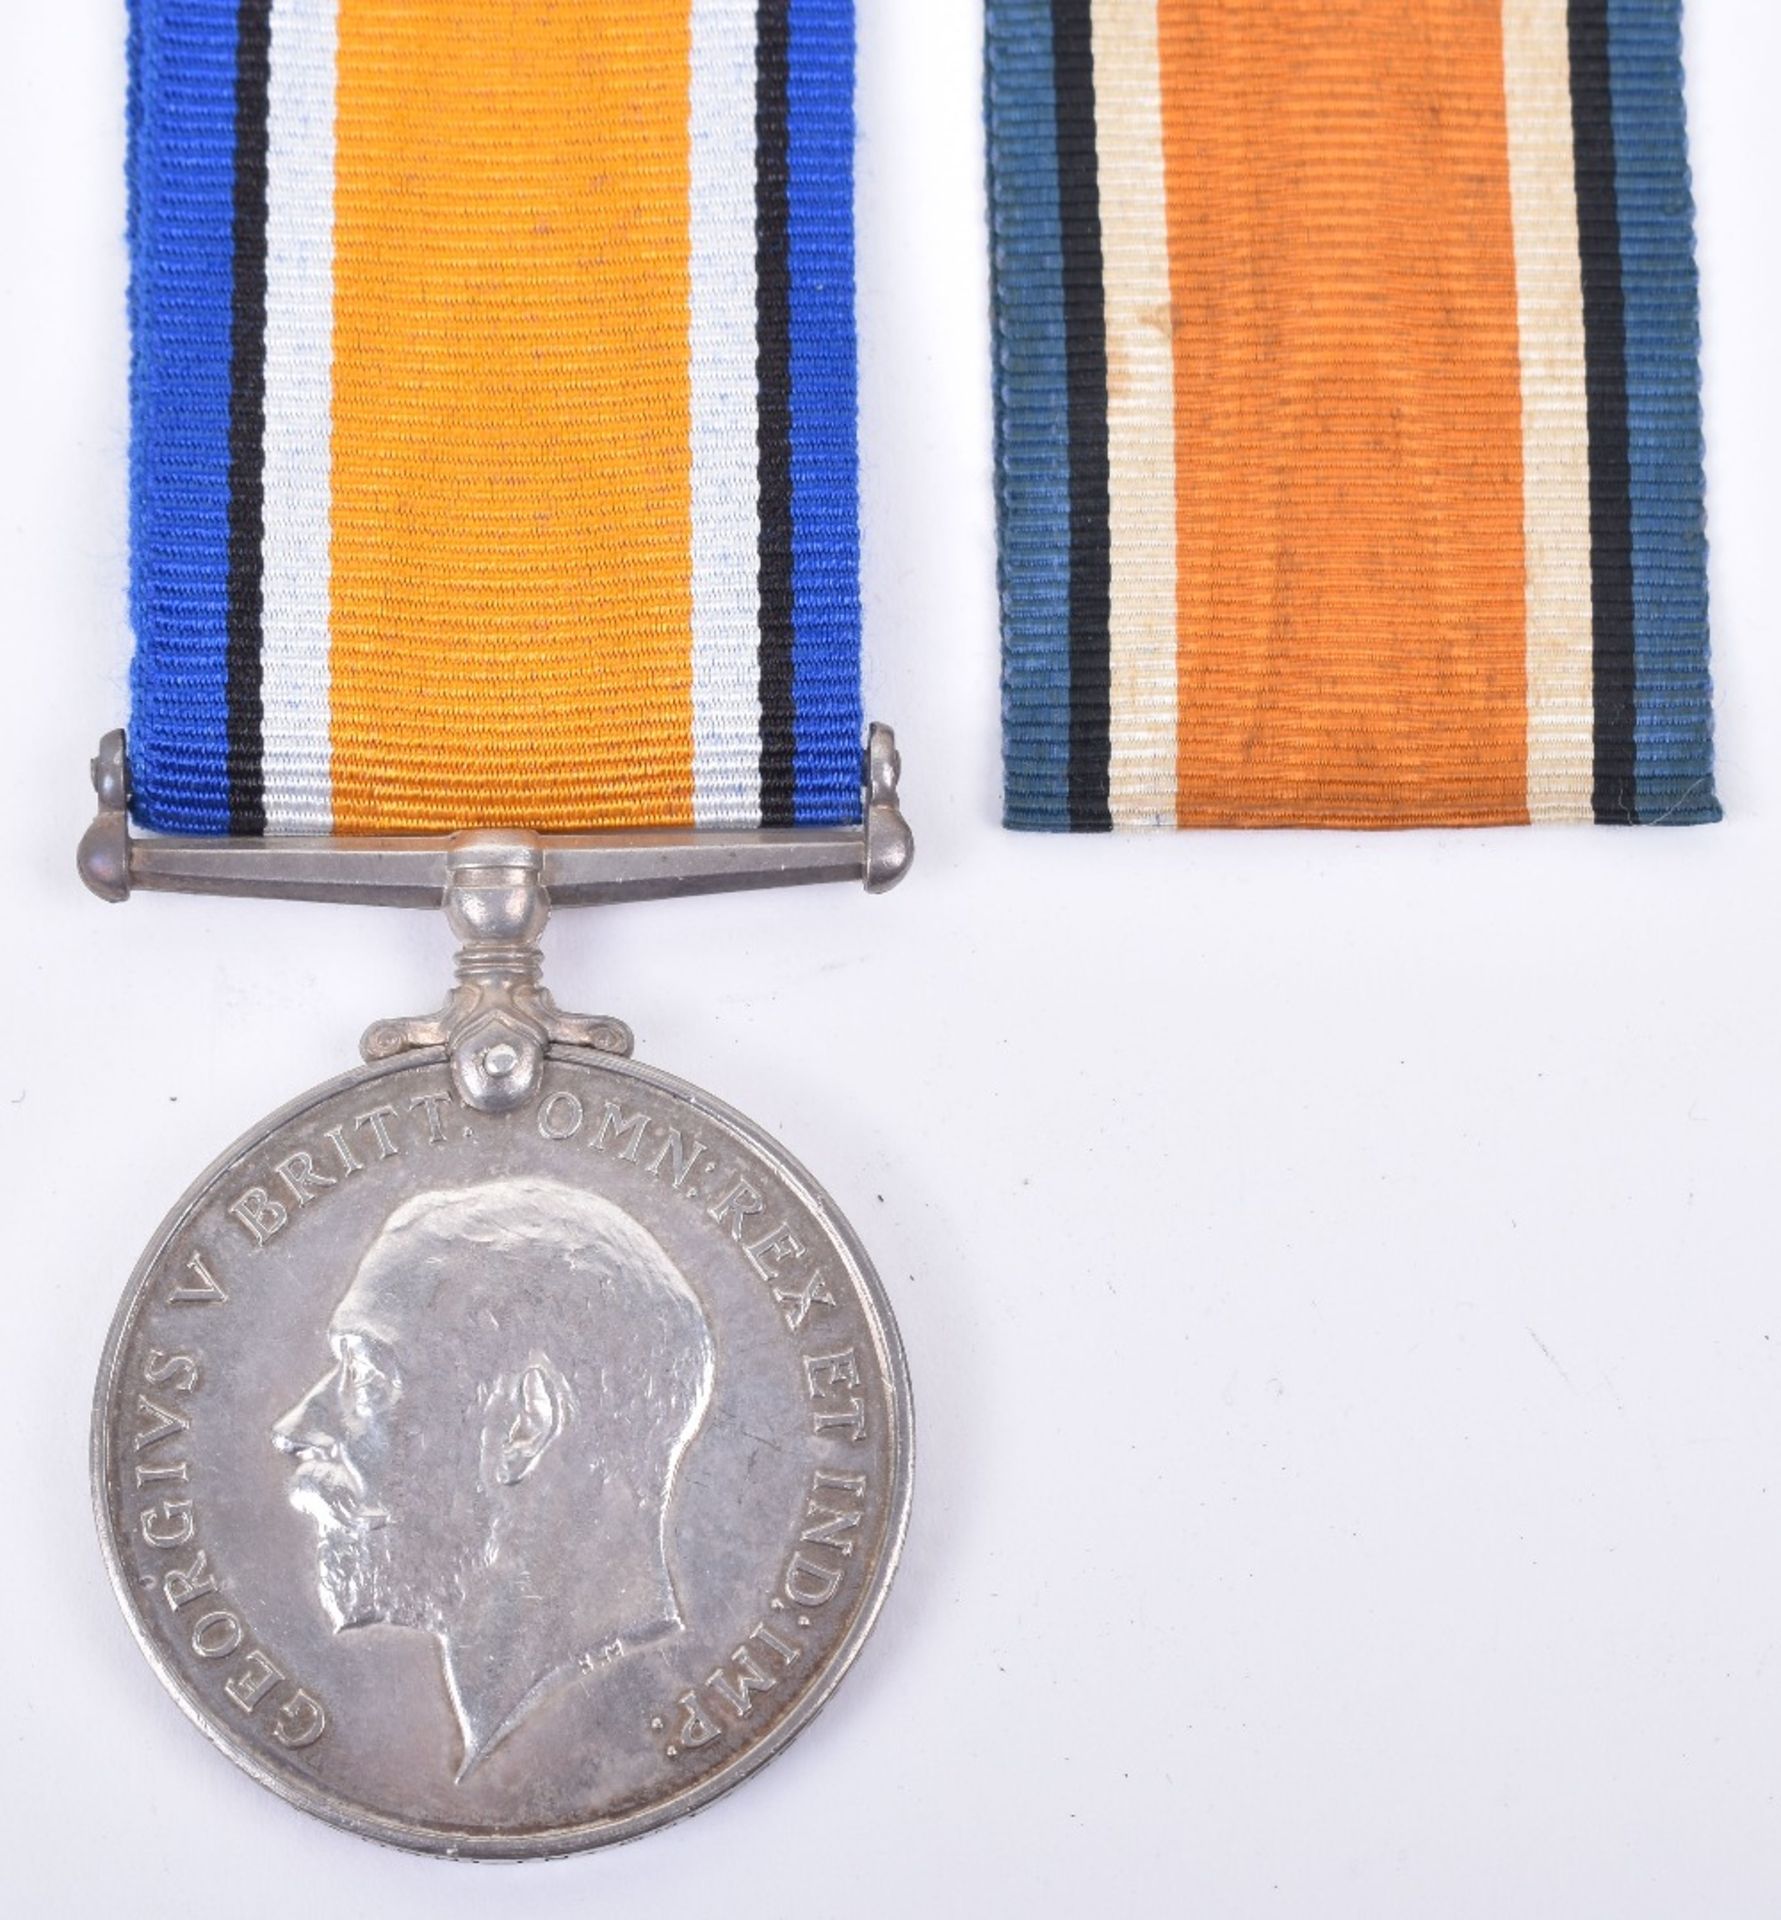 Rare WW1 British War Medal Camel Corps Australian Imperial Forces